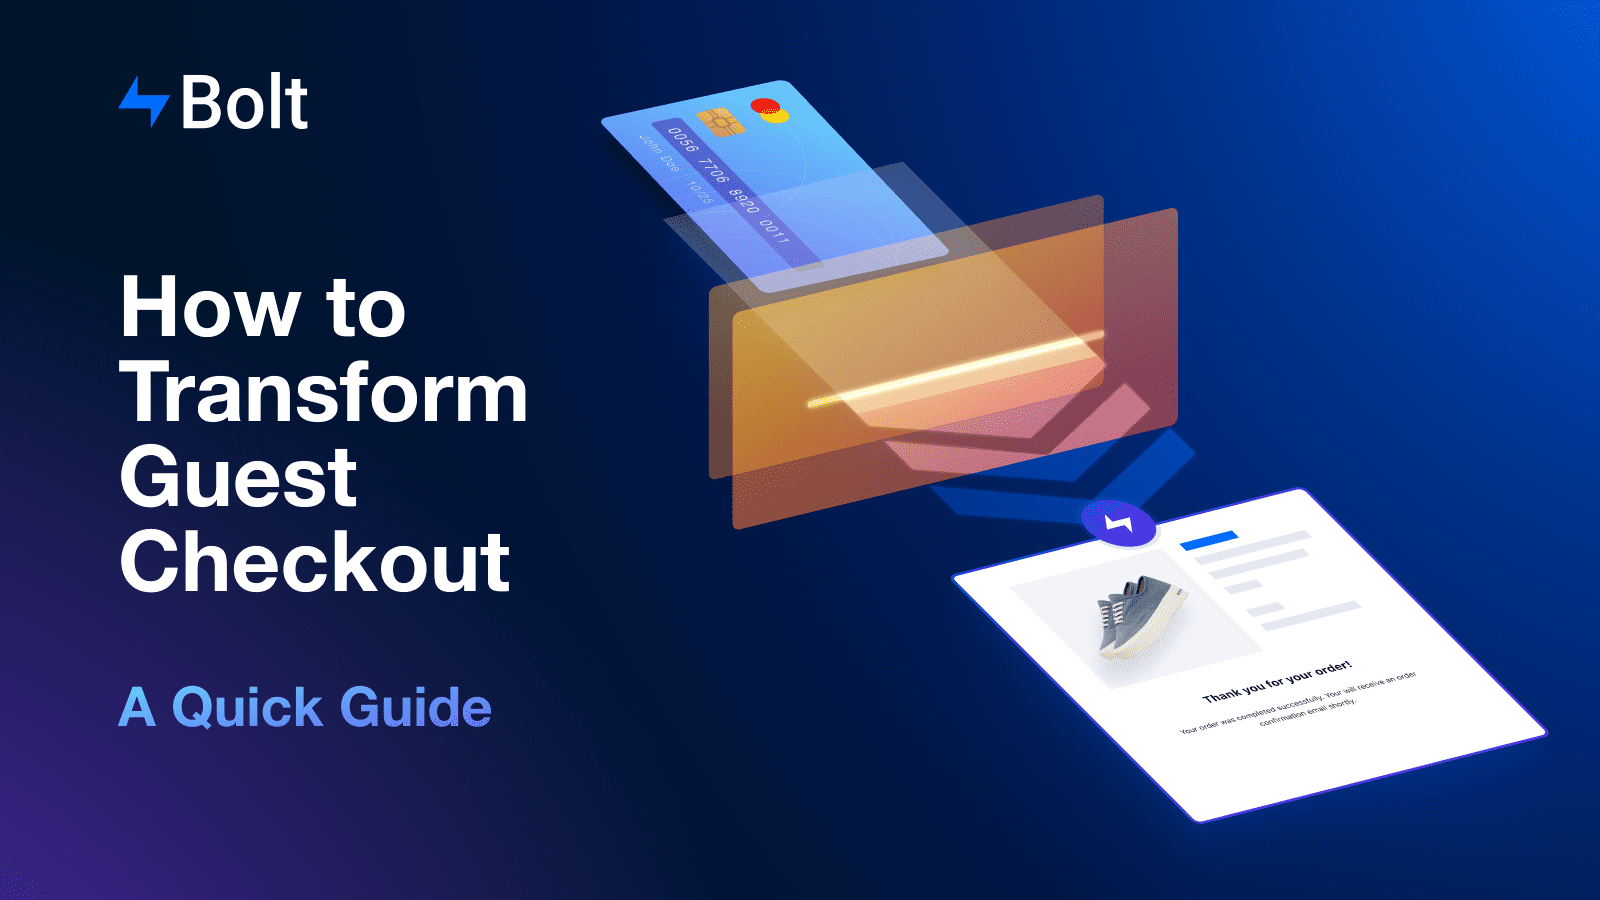 How to transform guest checkout (a quick guide)